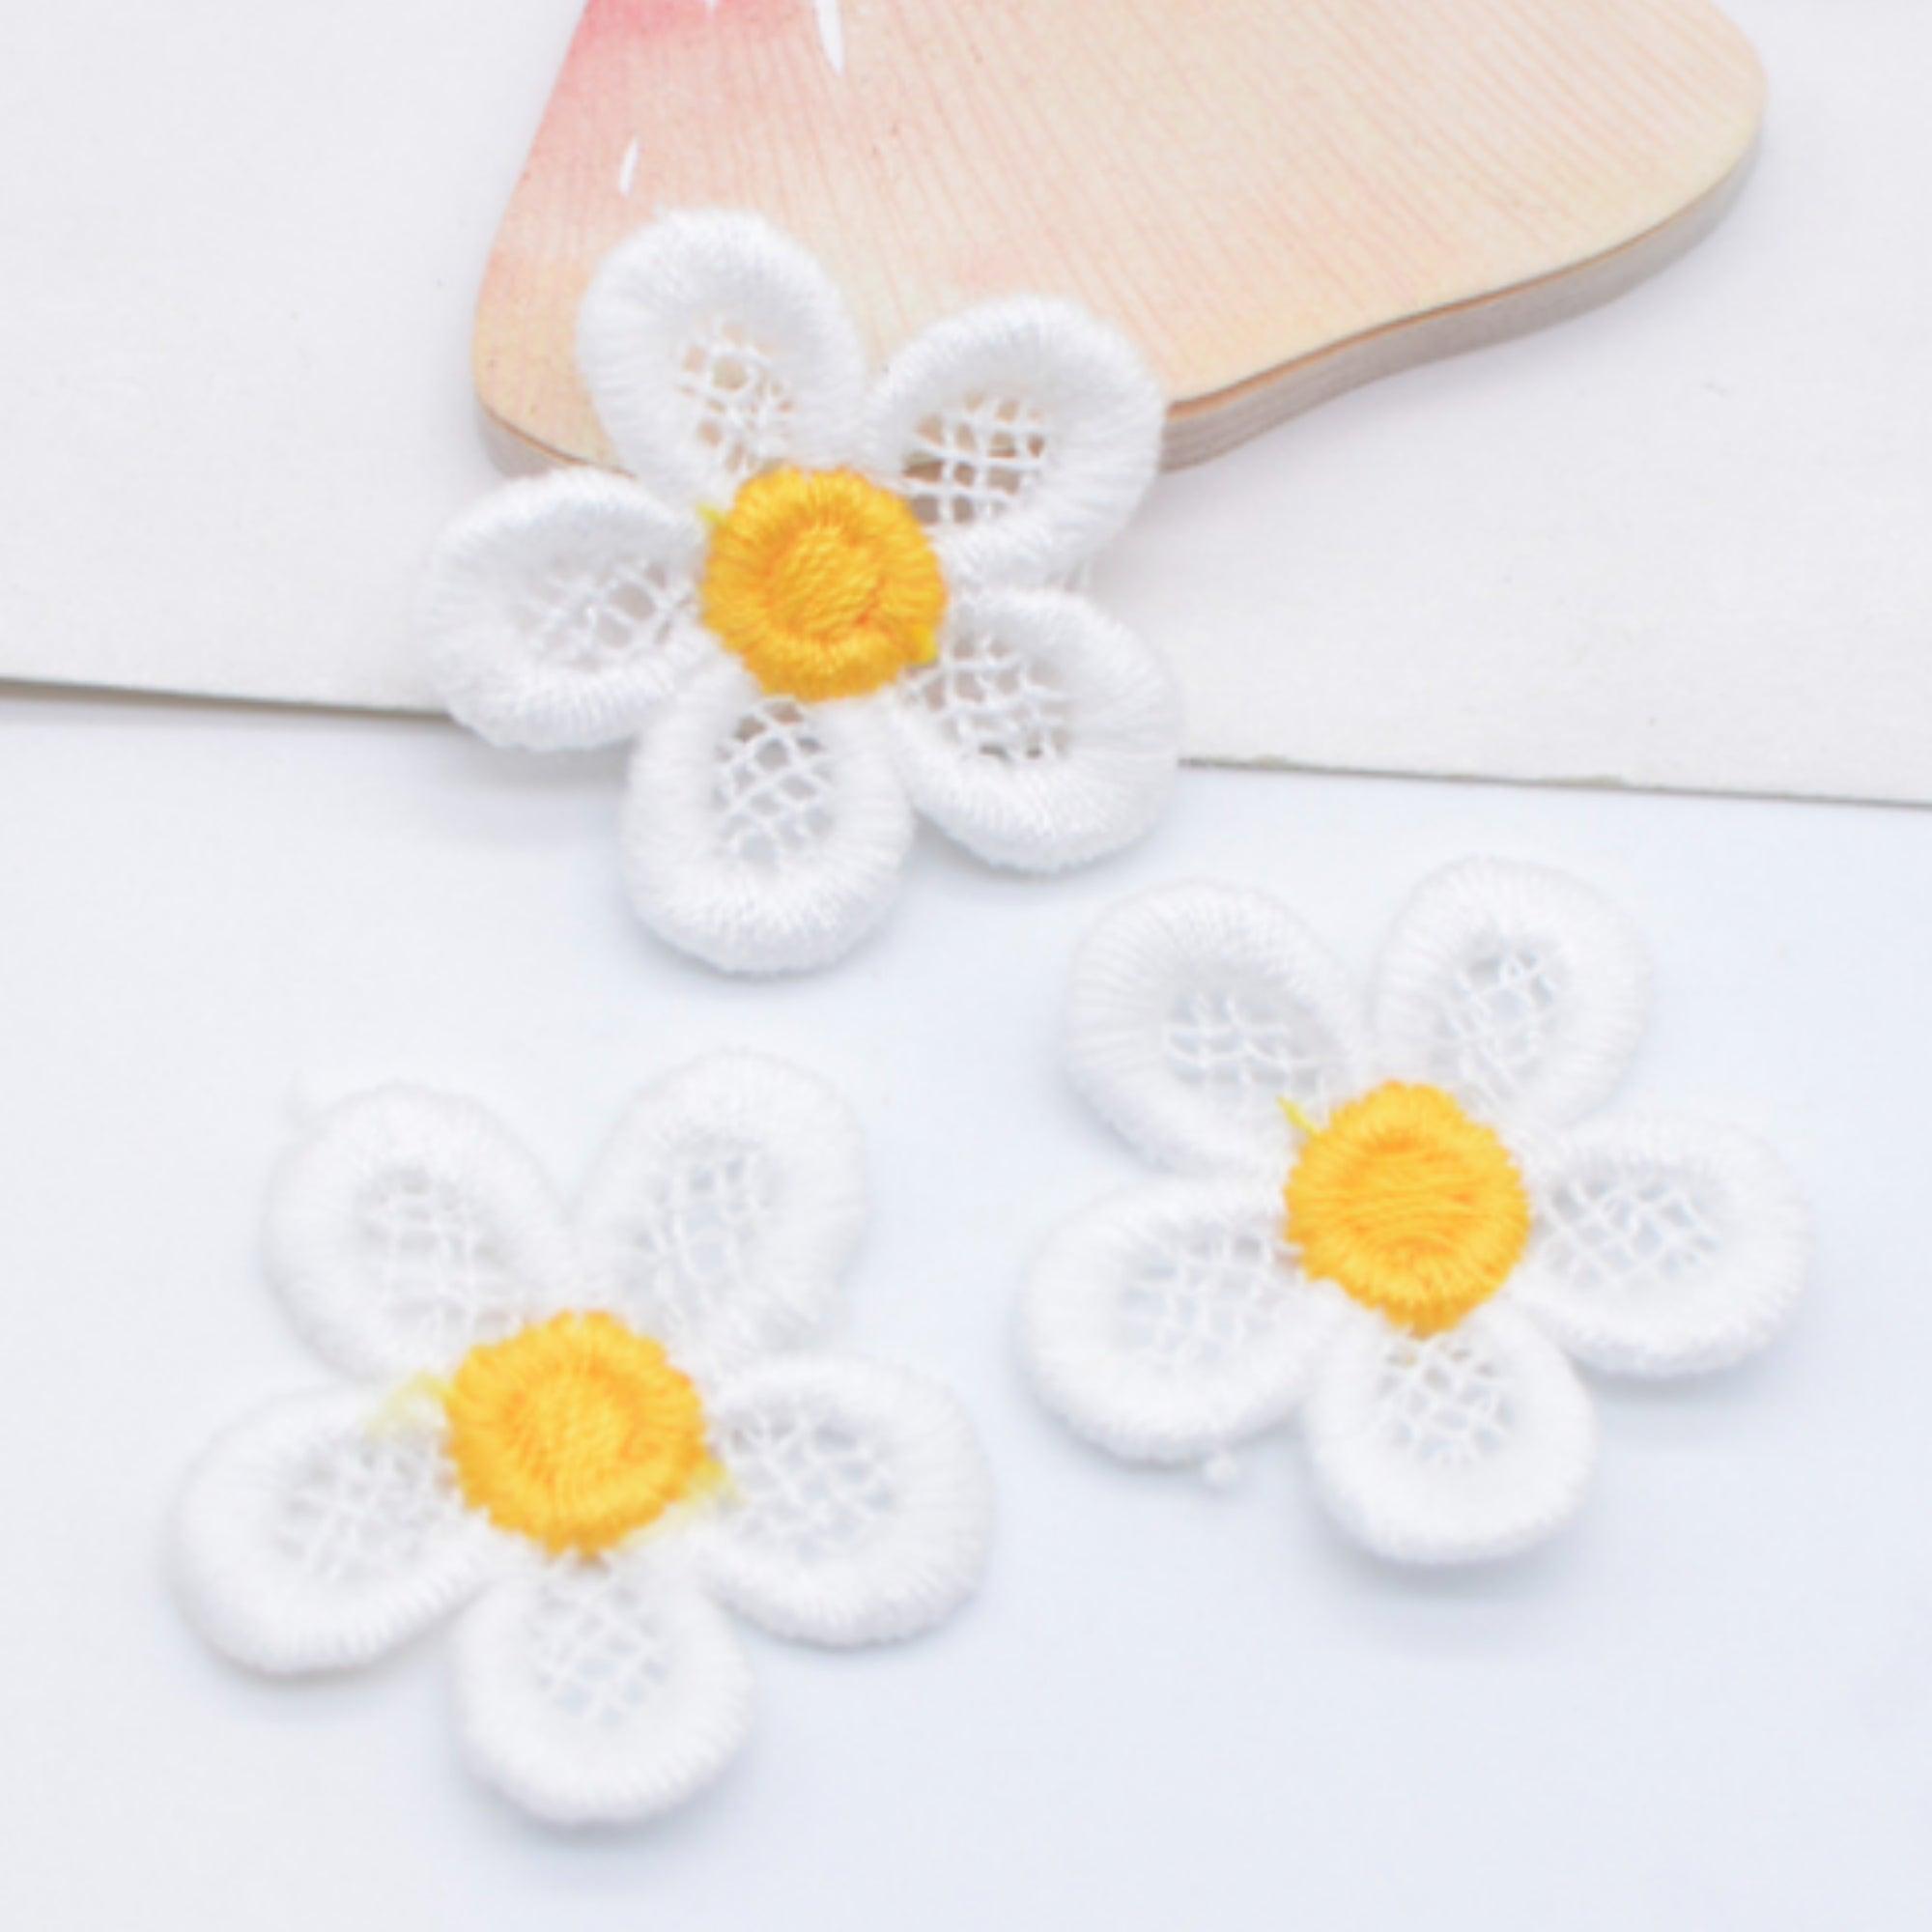 Embroidered Daisies Collection White 1" Scrapbook Embellishments by SSC Designs - 10 Pieces - Scrapbook Supply Companies